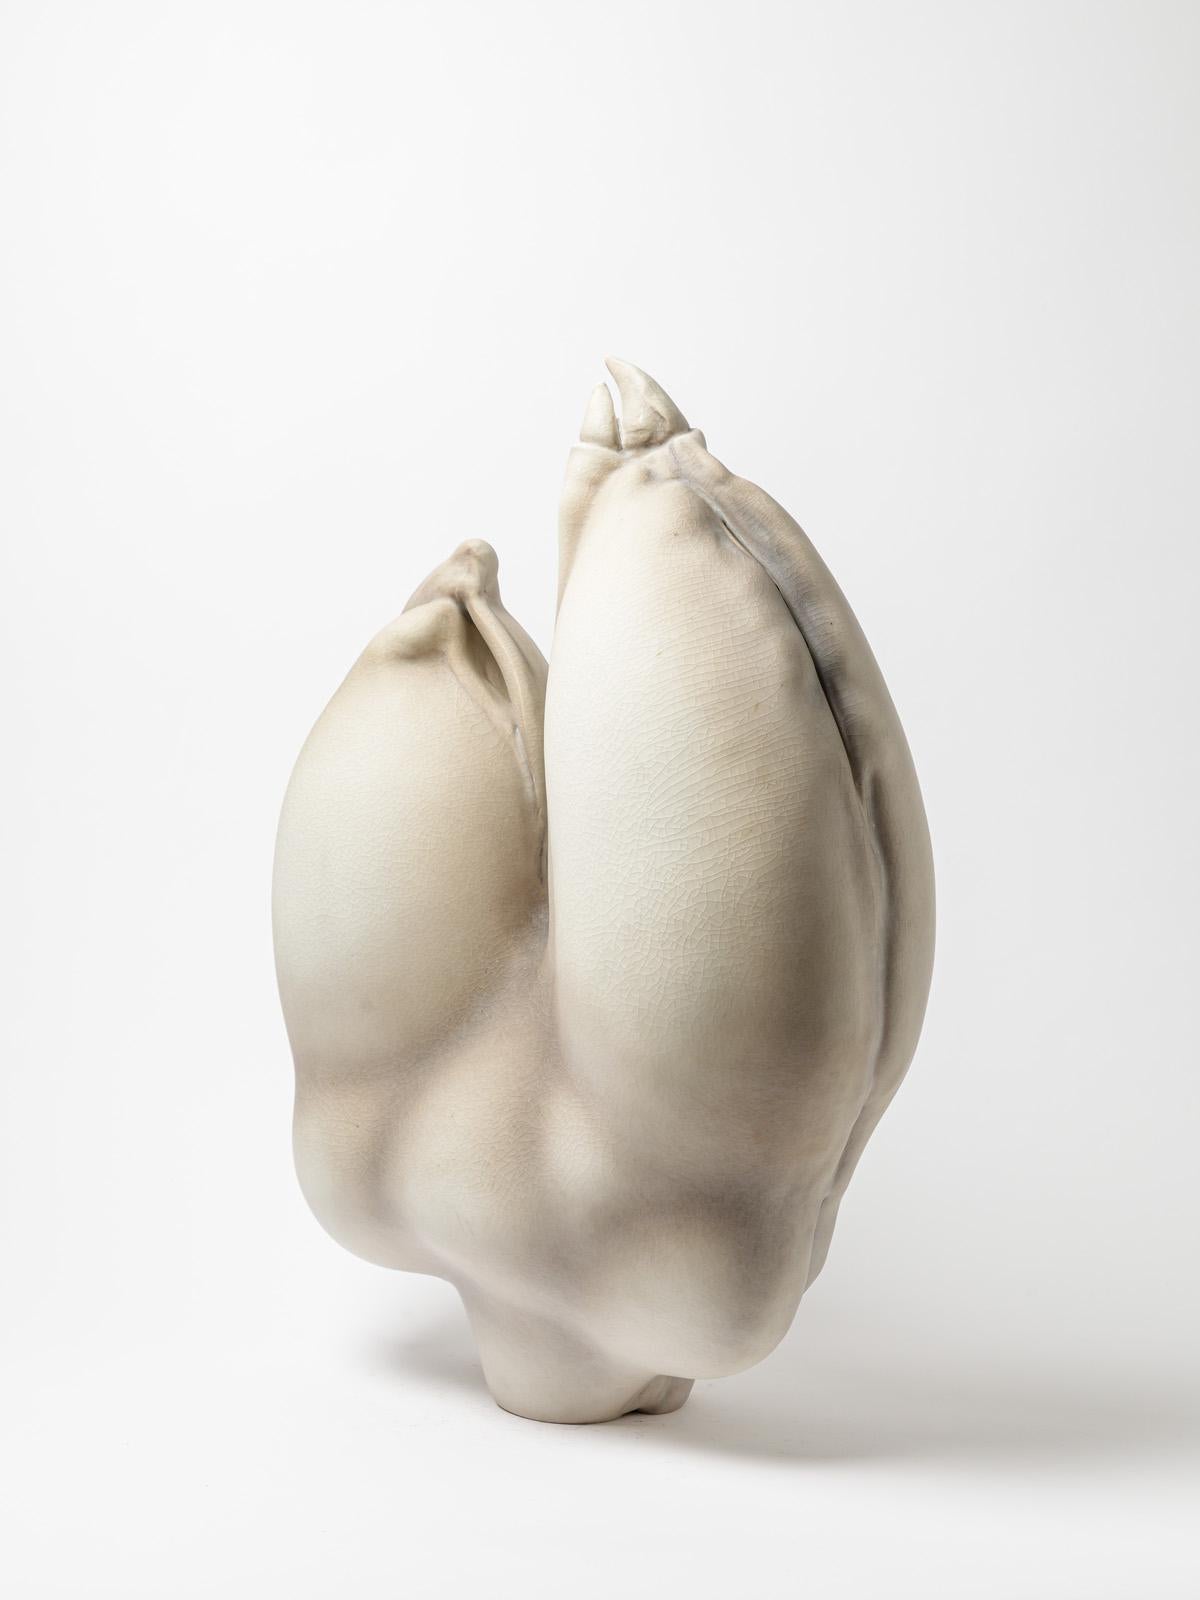 French Porcelain Sculpture by Wayne Fischer, 2018 For Sale